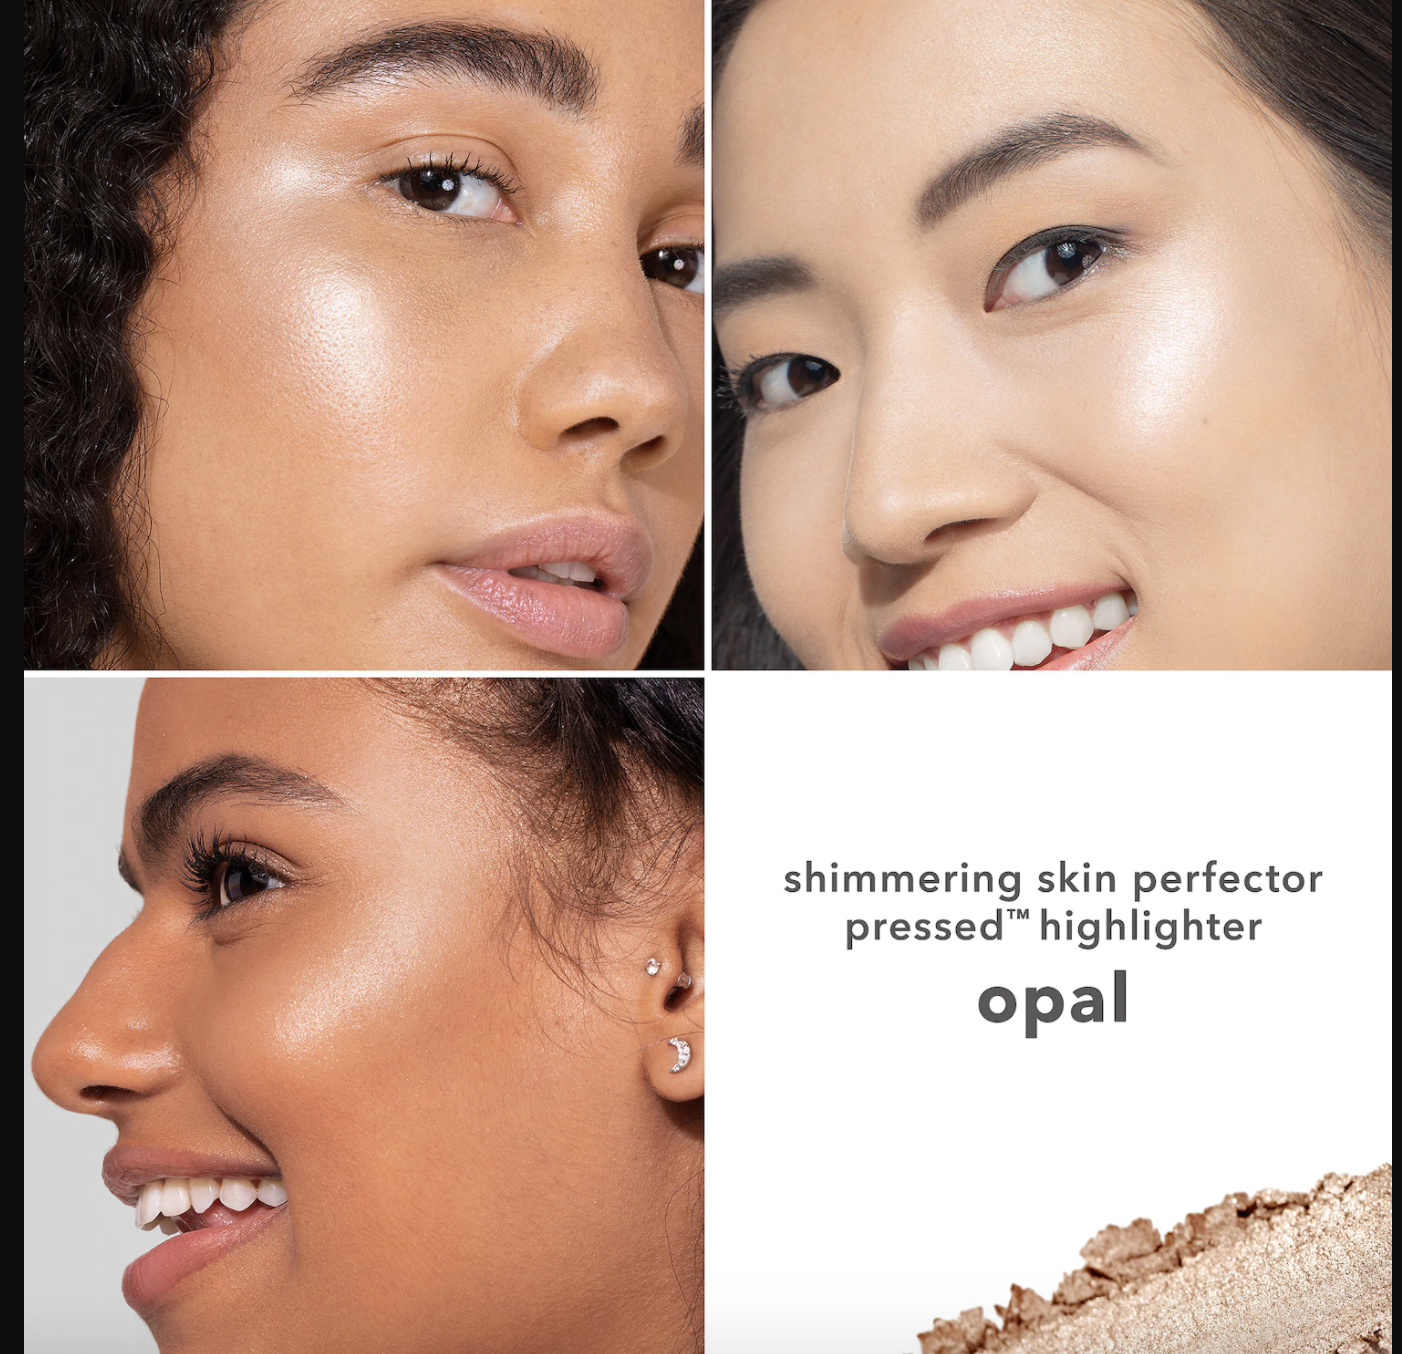 Three models showing how flattering the shade is on different skin tones